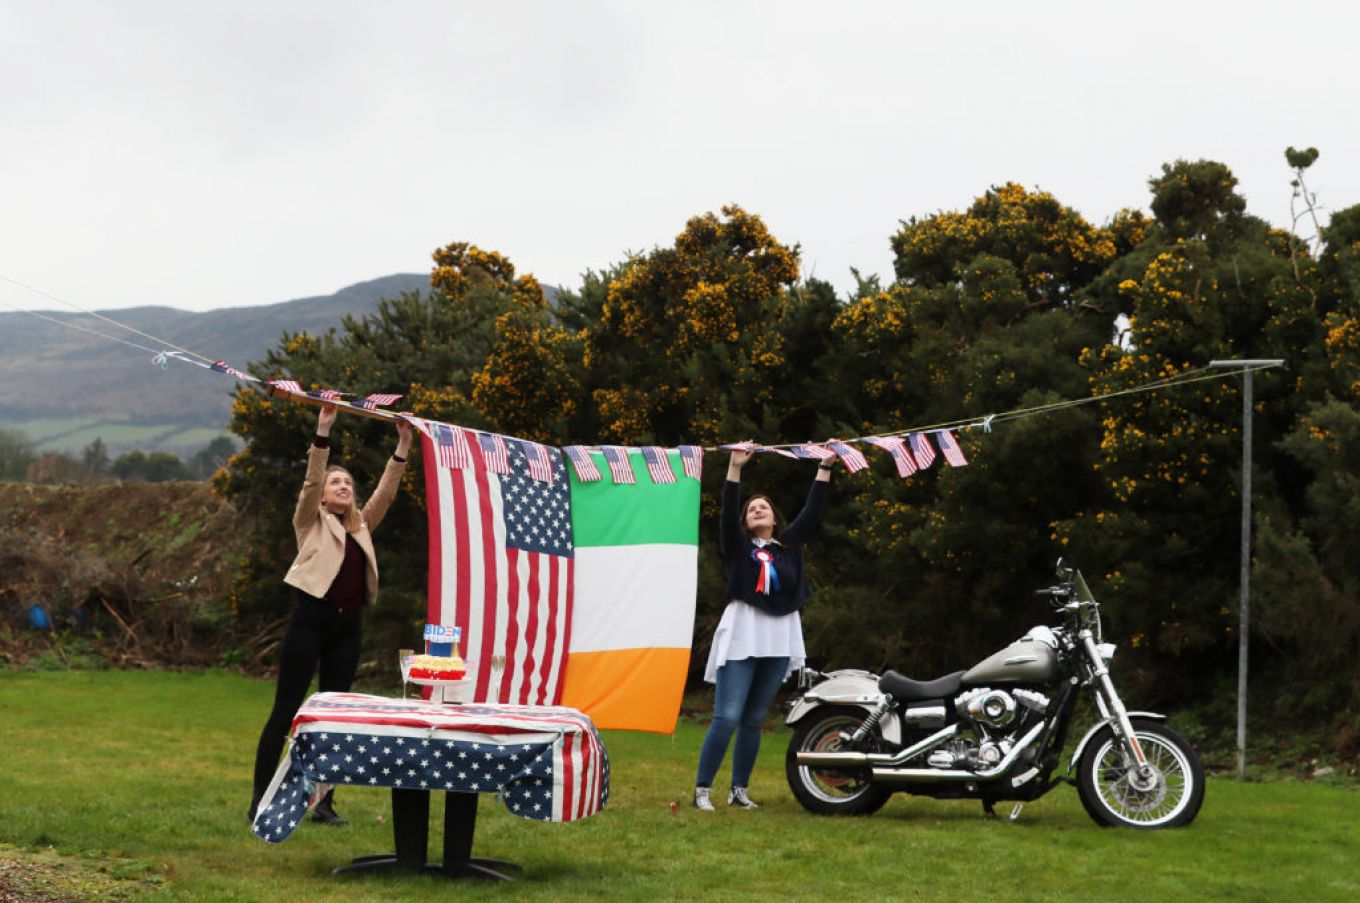 Fifth Cousins Of Us President Joe Biden, Cllr Andrea Mckevitt (Right) And Her Sister, Ciara, At Their Home On The Cooley Peninsula In Co Louth Marking Mr Biden's Inauguration On January 20Th. Photo: Pa